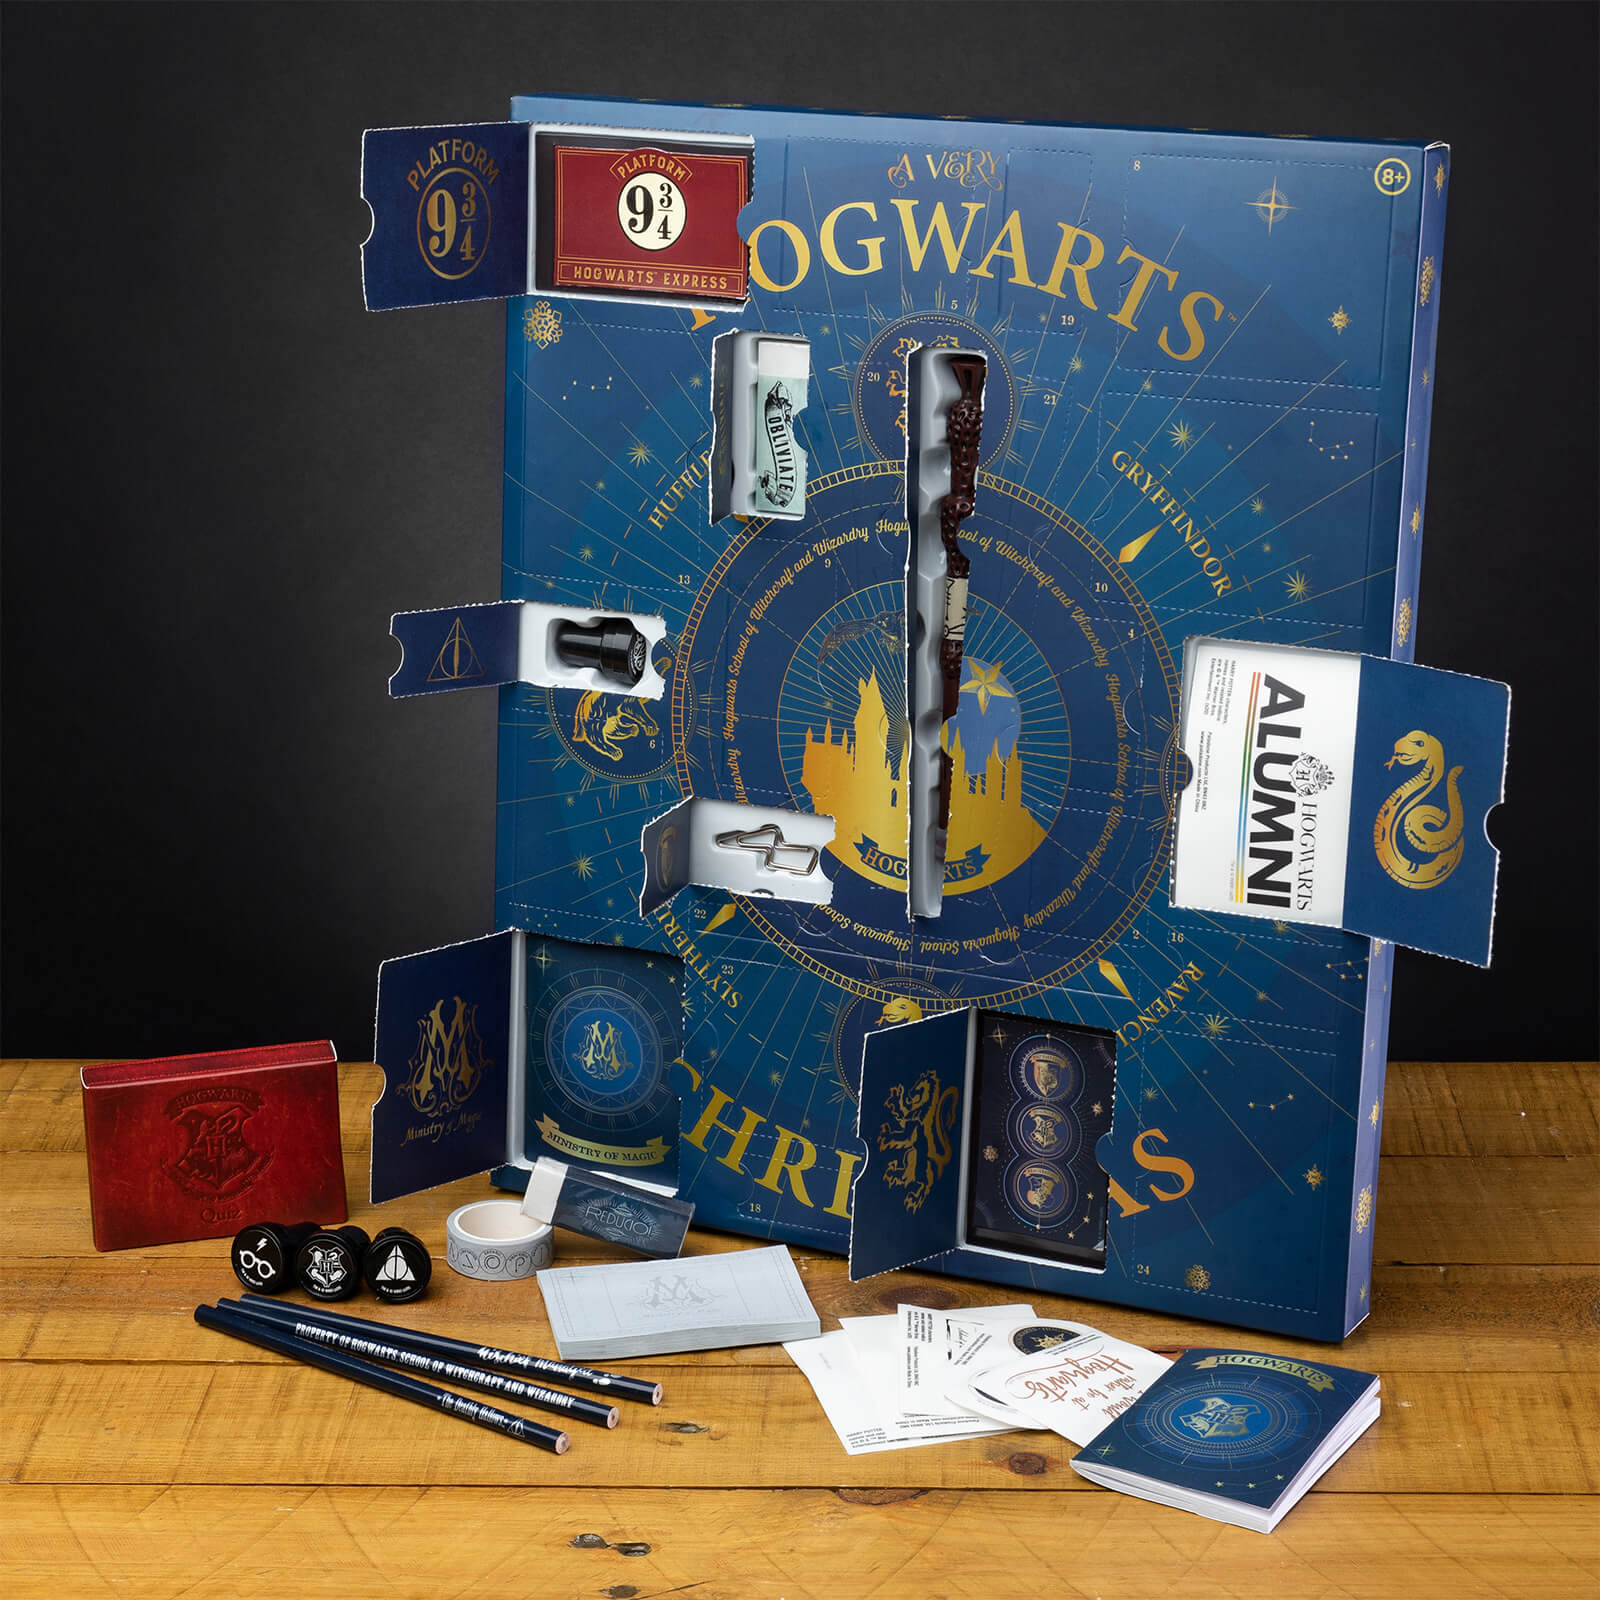 2020 Wizarding World Harry Potter Advent Calendar Available Now